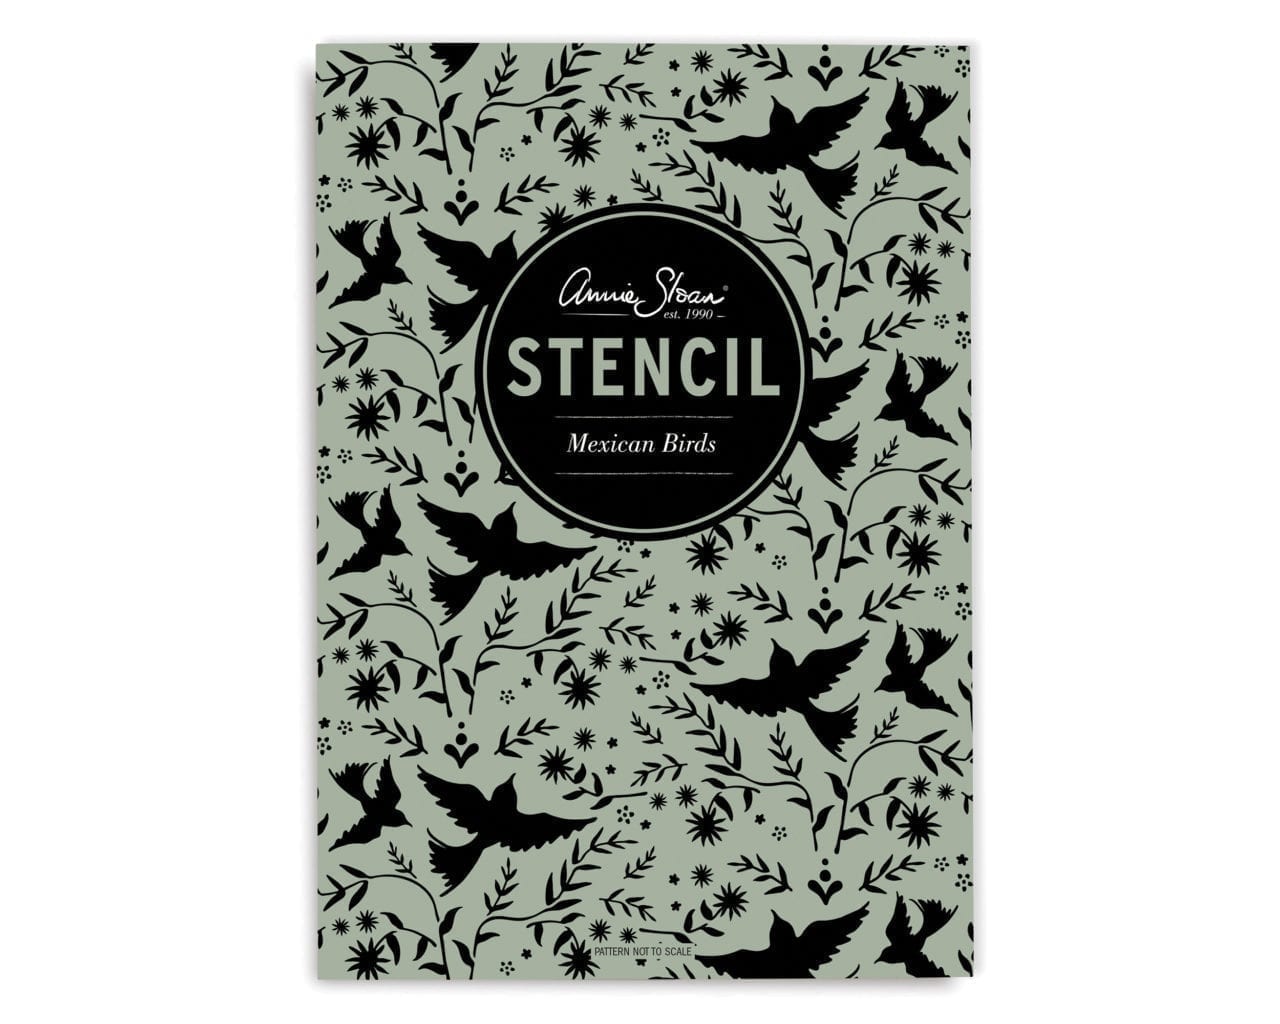 Mexican Birds Stencil by Annie Sloan packaging front